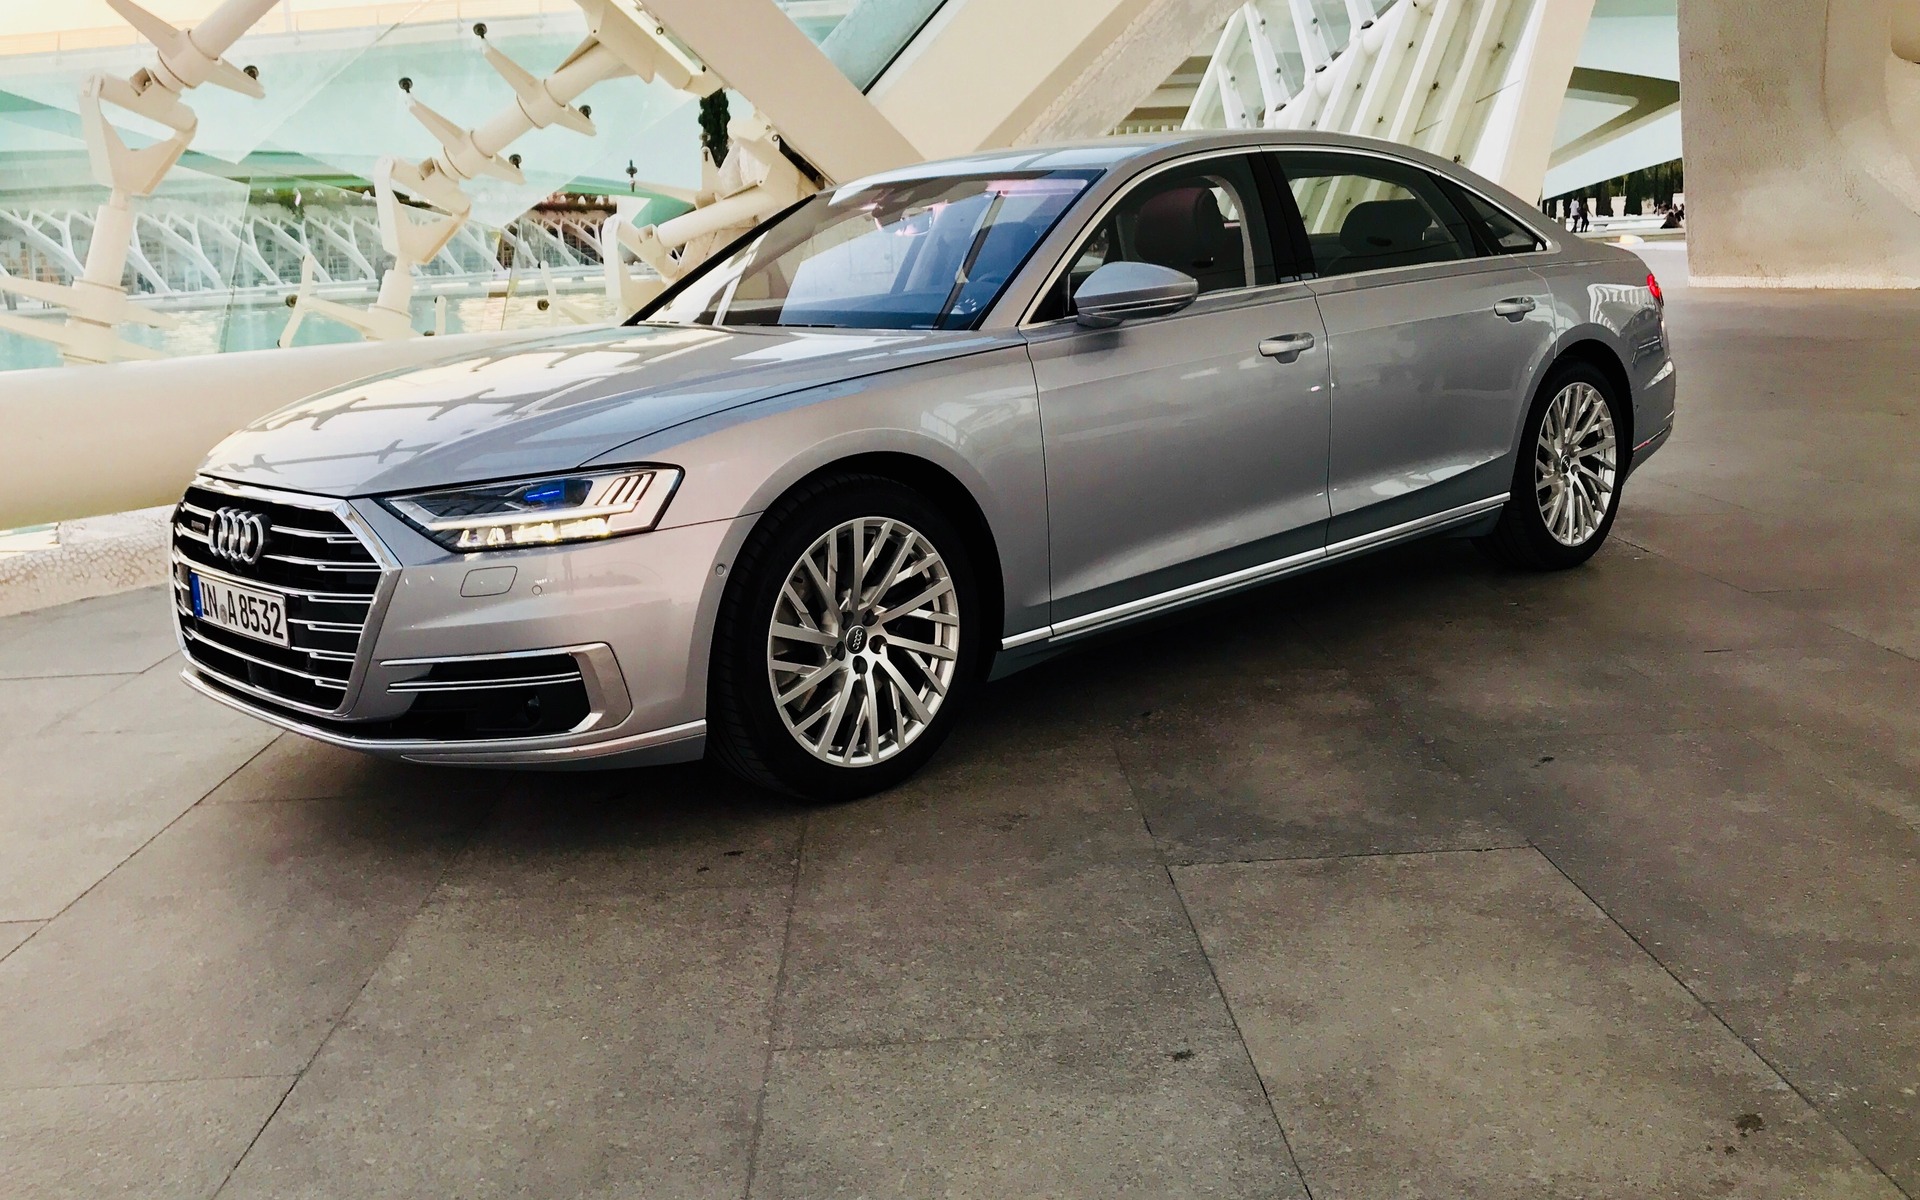 2019 Audi A8 L 55 TFSI quattro Price & Specifications - The Car Guide